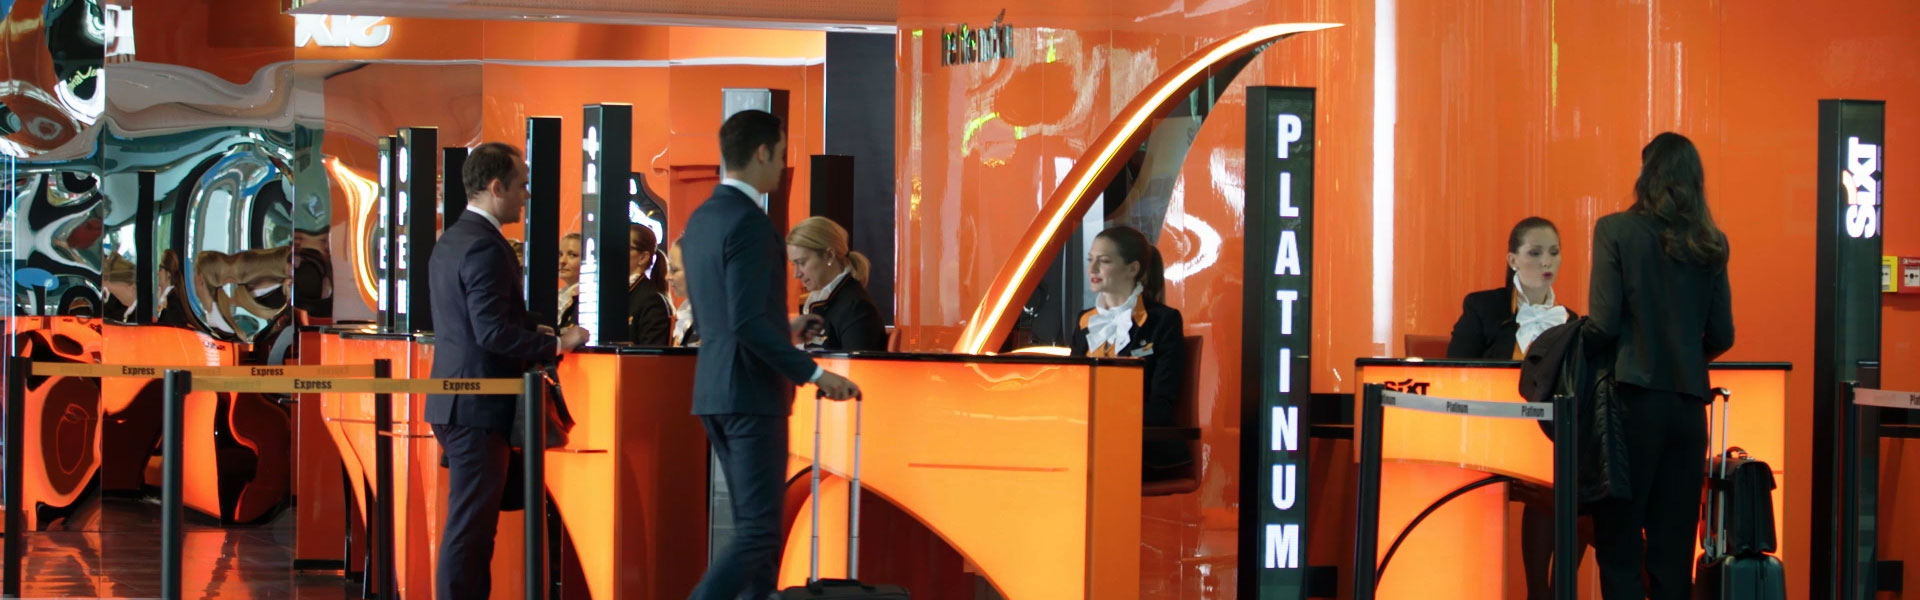 SIXT MOBILE CHECK-IN – NO WAITING TIME AT THE COUNTER